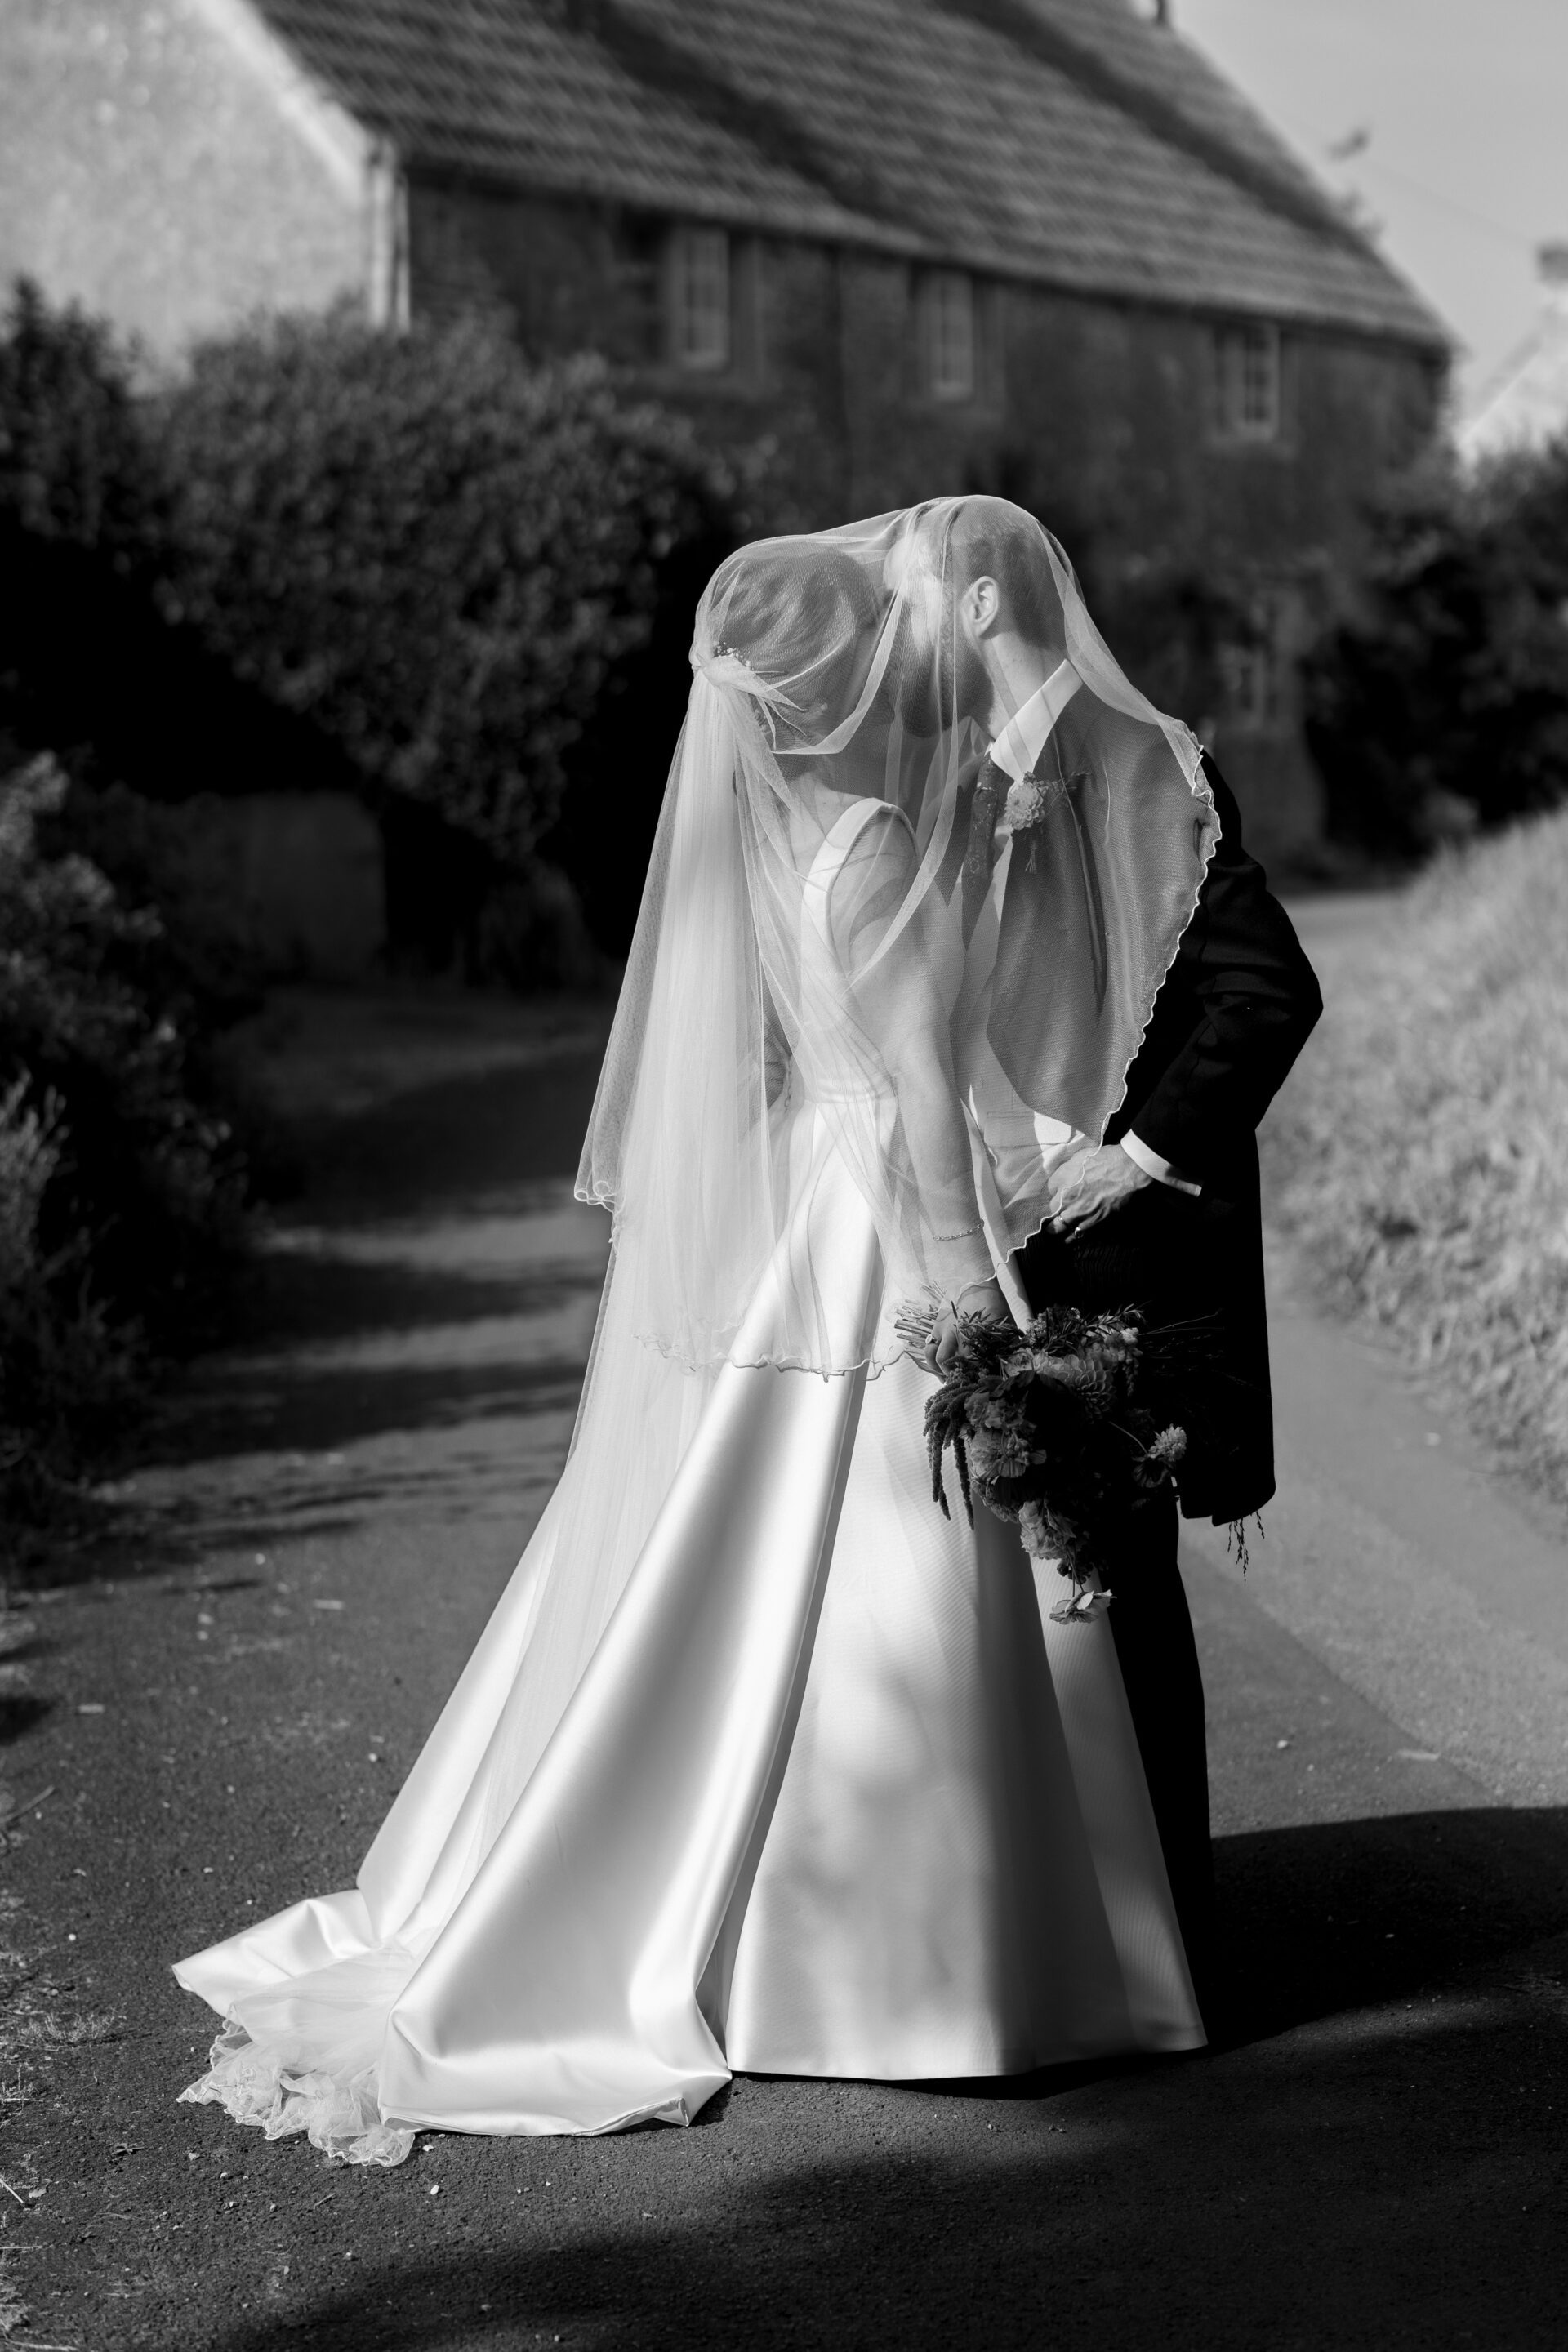 The bride and groom kiss under the veil